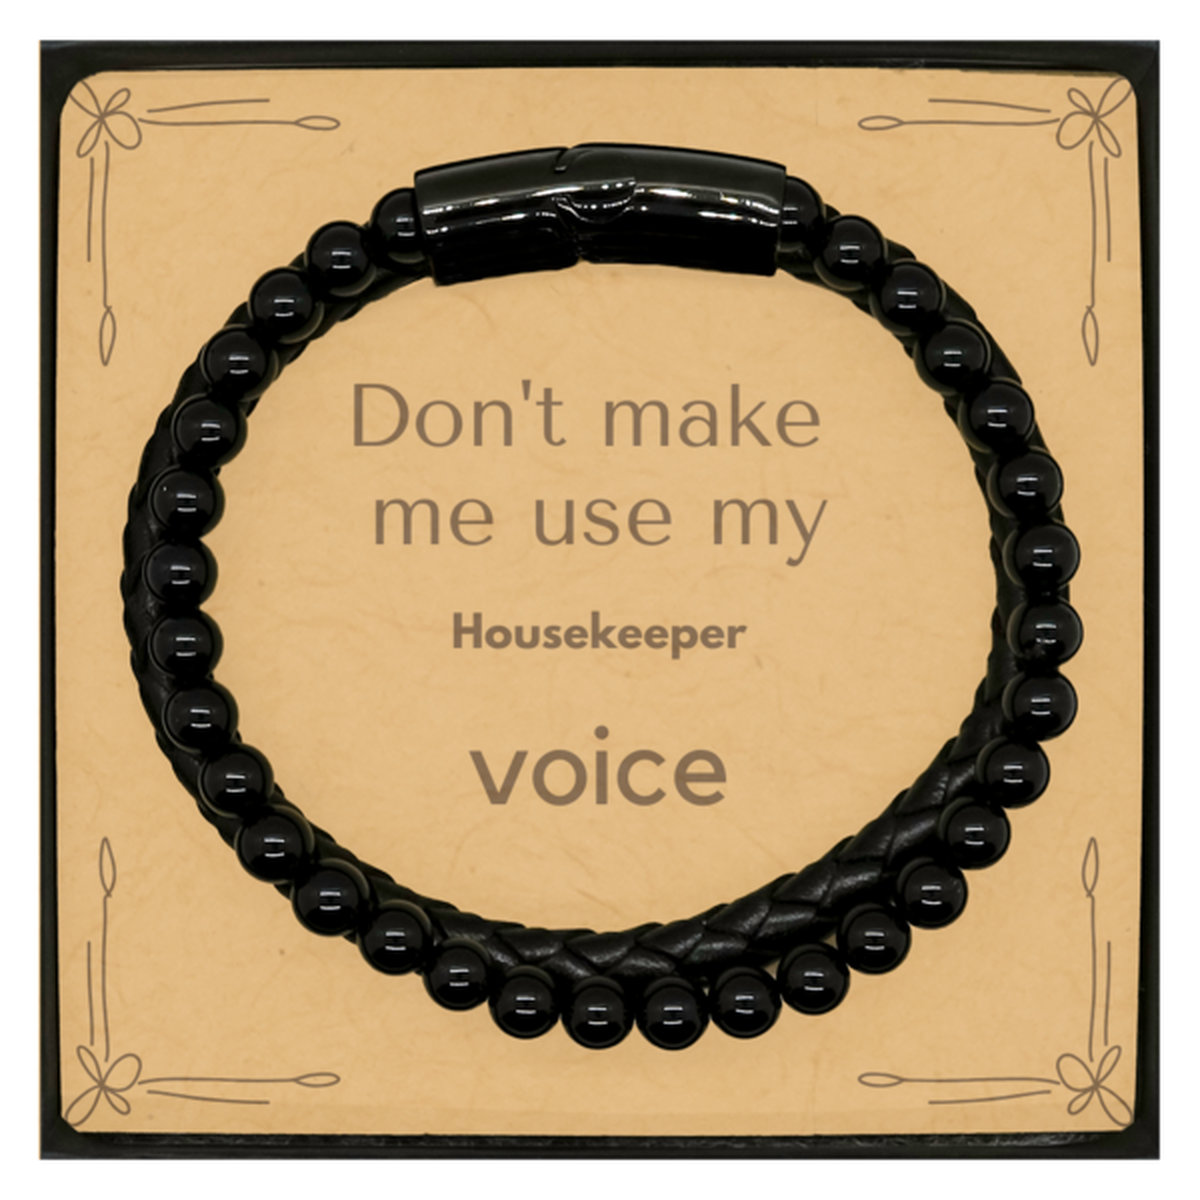 Don't make me use my Housekeeper voice, Sarcasm Housekeeper Card Gifts, Christmas Housekeeper Stone Leather Bracelets Birthday Unique Gifts For Housekeeper Coworkers, Men, Women, Colleague, Friends